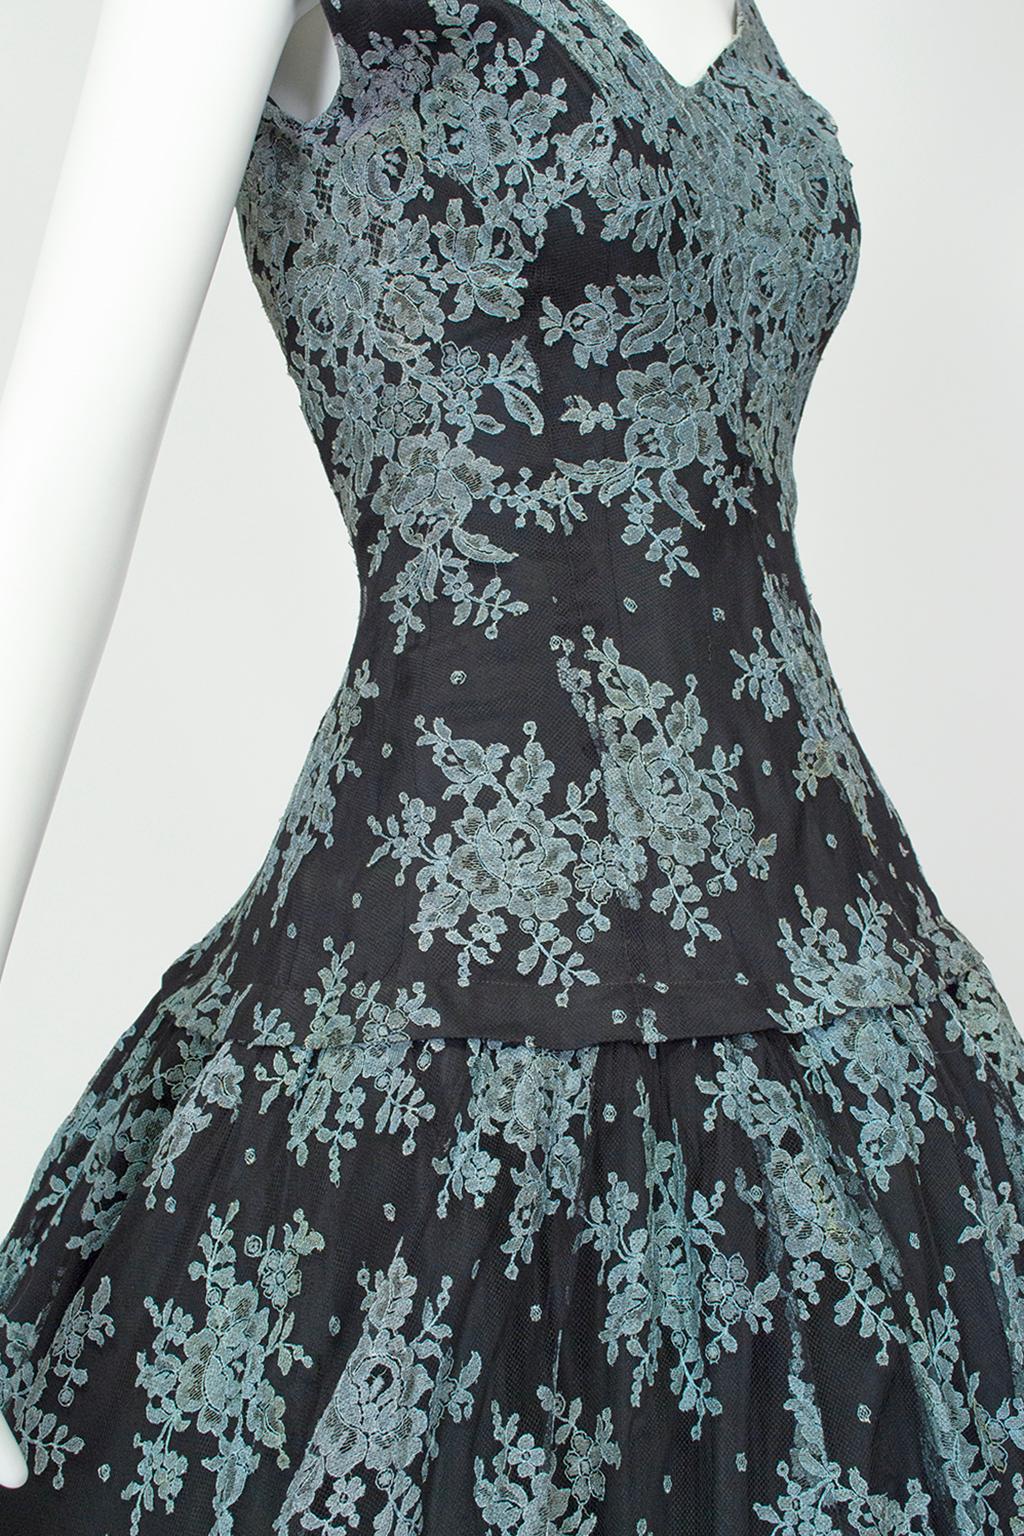 Bespoke Spanish Blue and Black Lace Mantilla Drop Waist Party Dress – XS, 1950s In Good Condition For Sale In Tucson, AZ